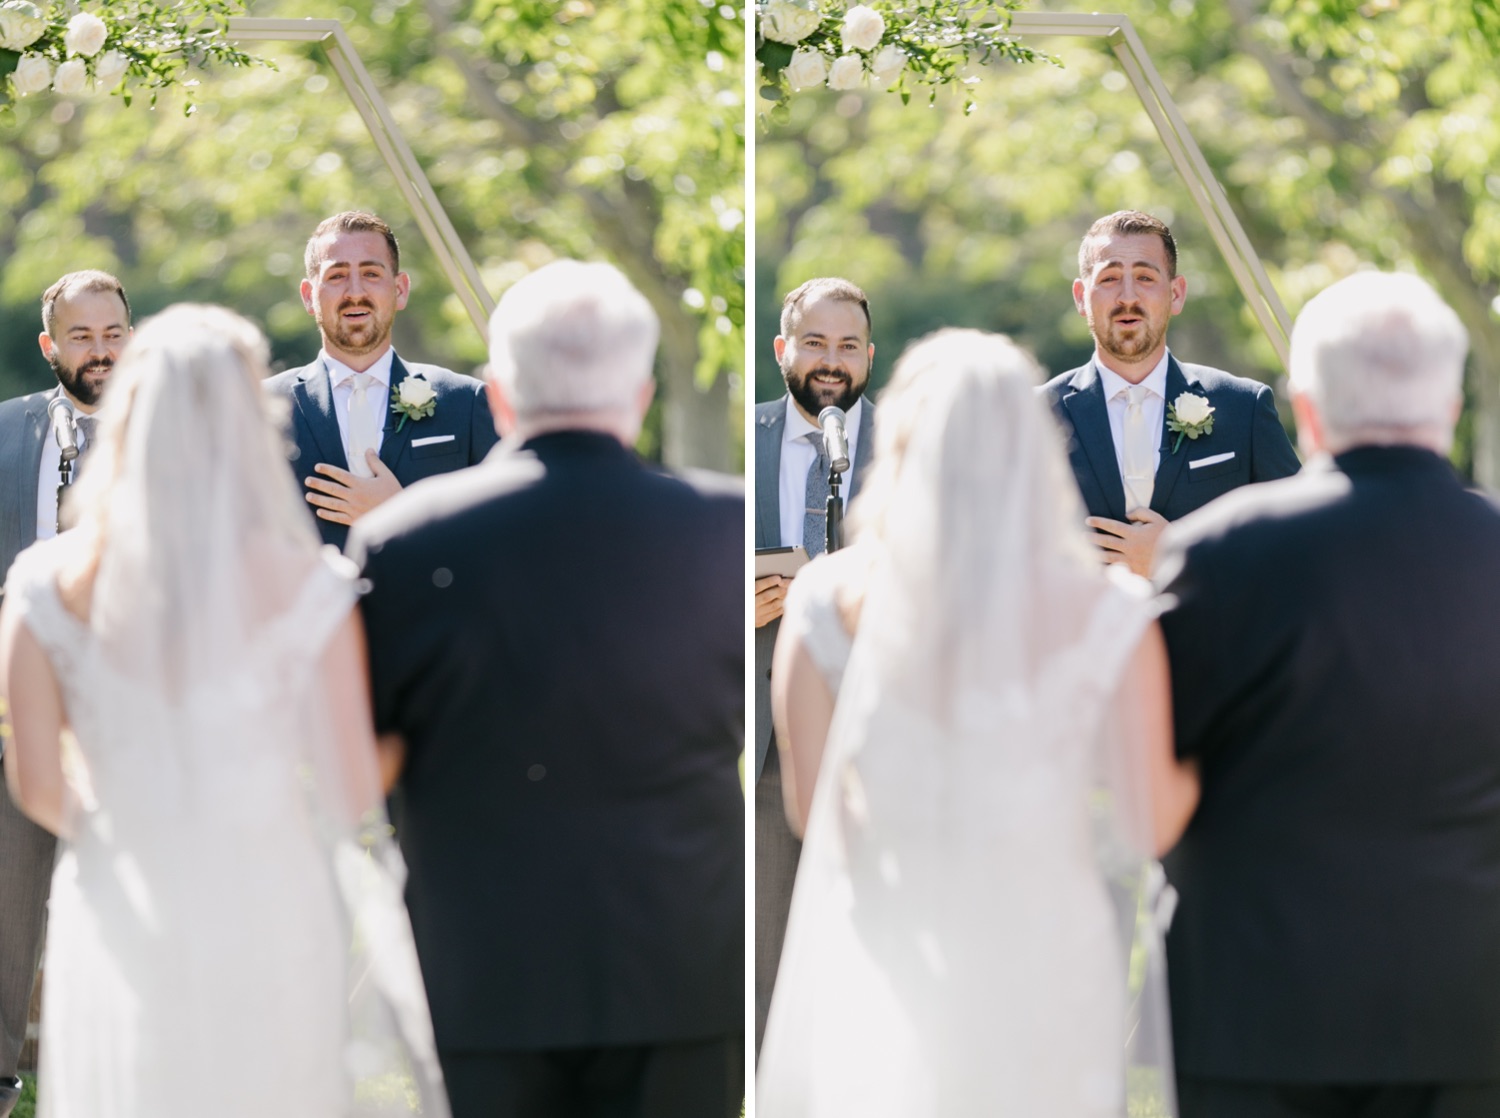 Groom getting emotional as he sees his bride walk down the aisle for the first time at walnut grove wedding